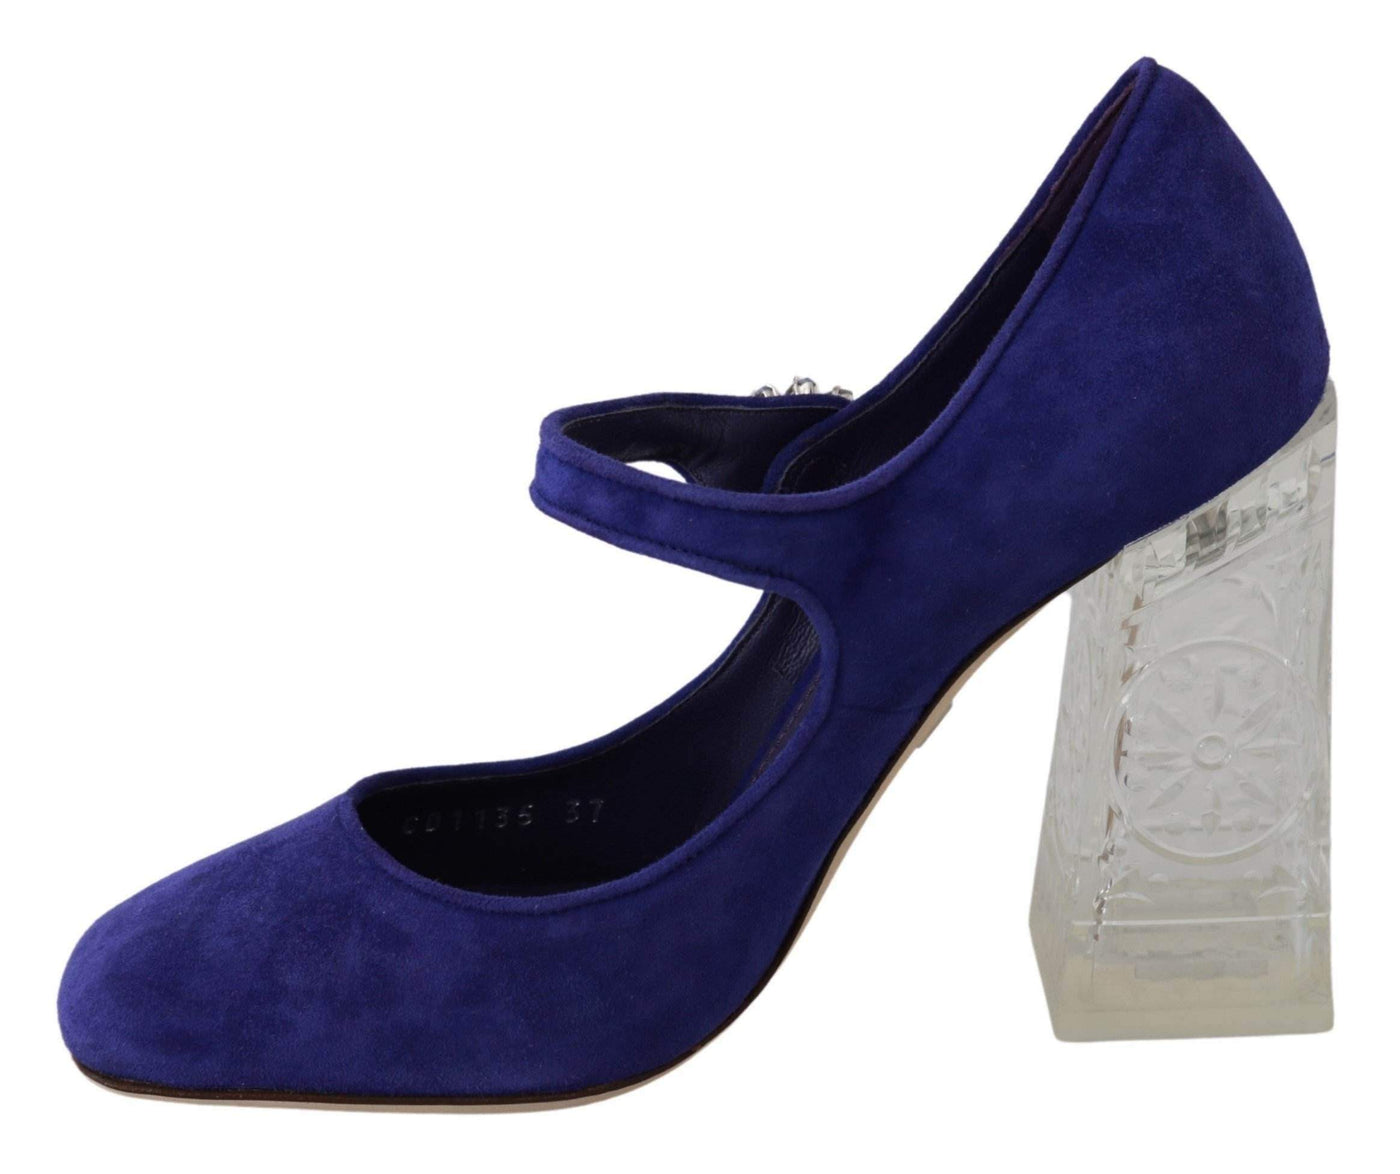 Dolce & Gabbana Purple Suede Crystal Pumps Heels Shoes #women, Brand_Dolce & Gabbana, Catch, Category_Shoes, Dolce & Gabbana, EU36/US5.5, EU37/US6.5, EU38/US7.5, EU39/US8.5, EU40/US9.5, EU41/US10.5, feed-agegroup-adult, feed-color-purple, feed-gender-female, feed-size-US5.5, feed-size-US7.5, Gender_Women, Kogan, Pumps - Women - Shoes, Purple, Shoes - New Arrivals at SEYMAYKA